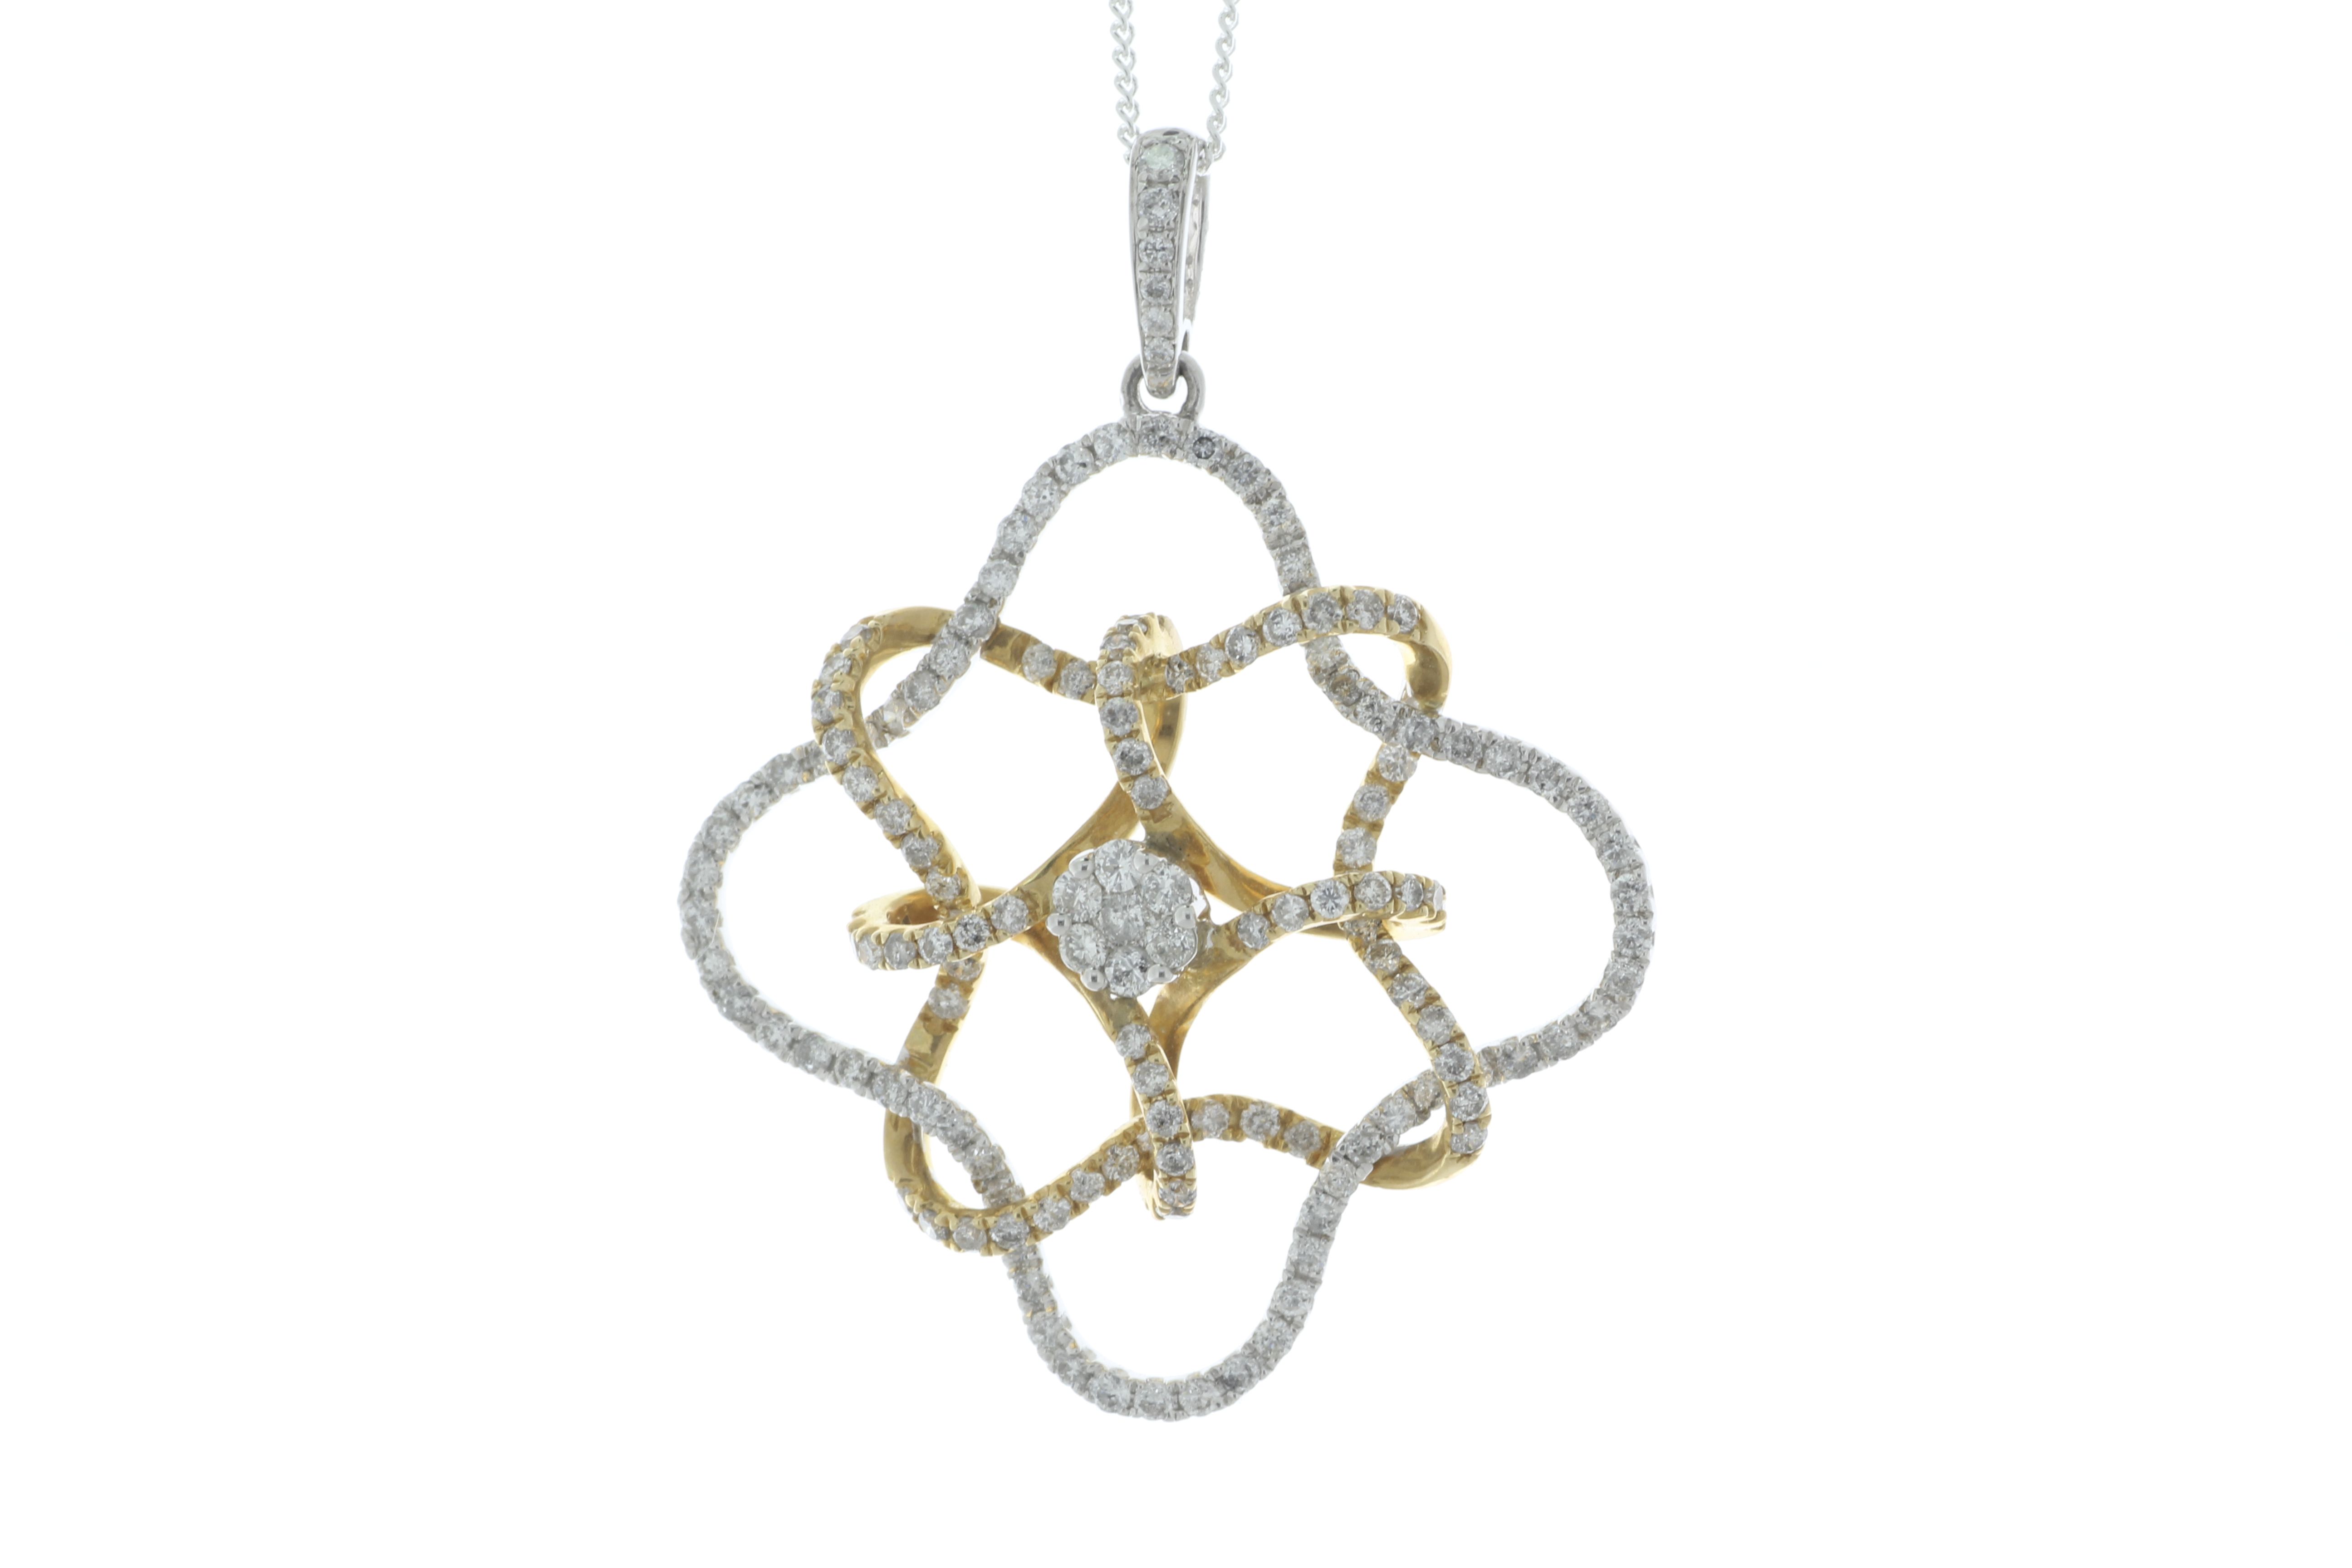 14ct Gold Illusion Set Cluster Diamond Pendant 1.77 Carats - Valued By IDI £7,575.00 - One hundred - Image 2 of 4